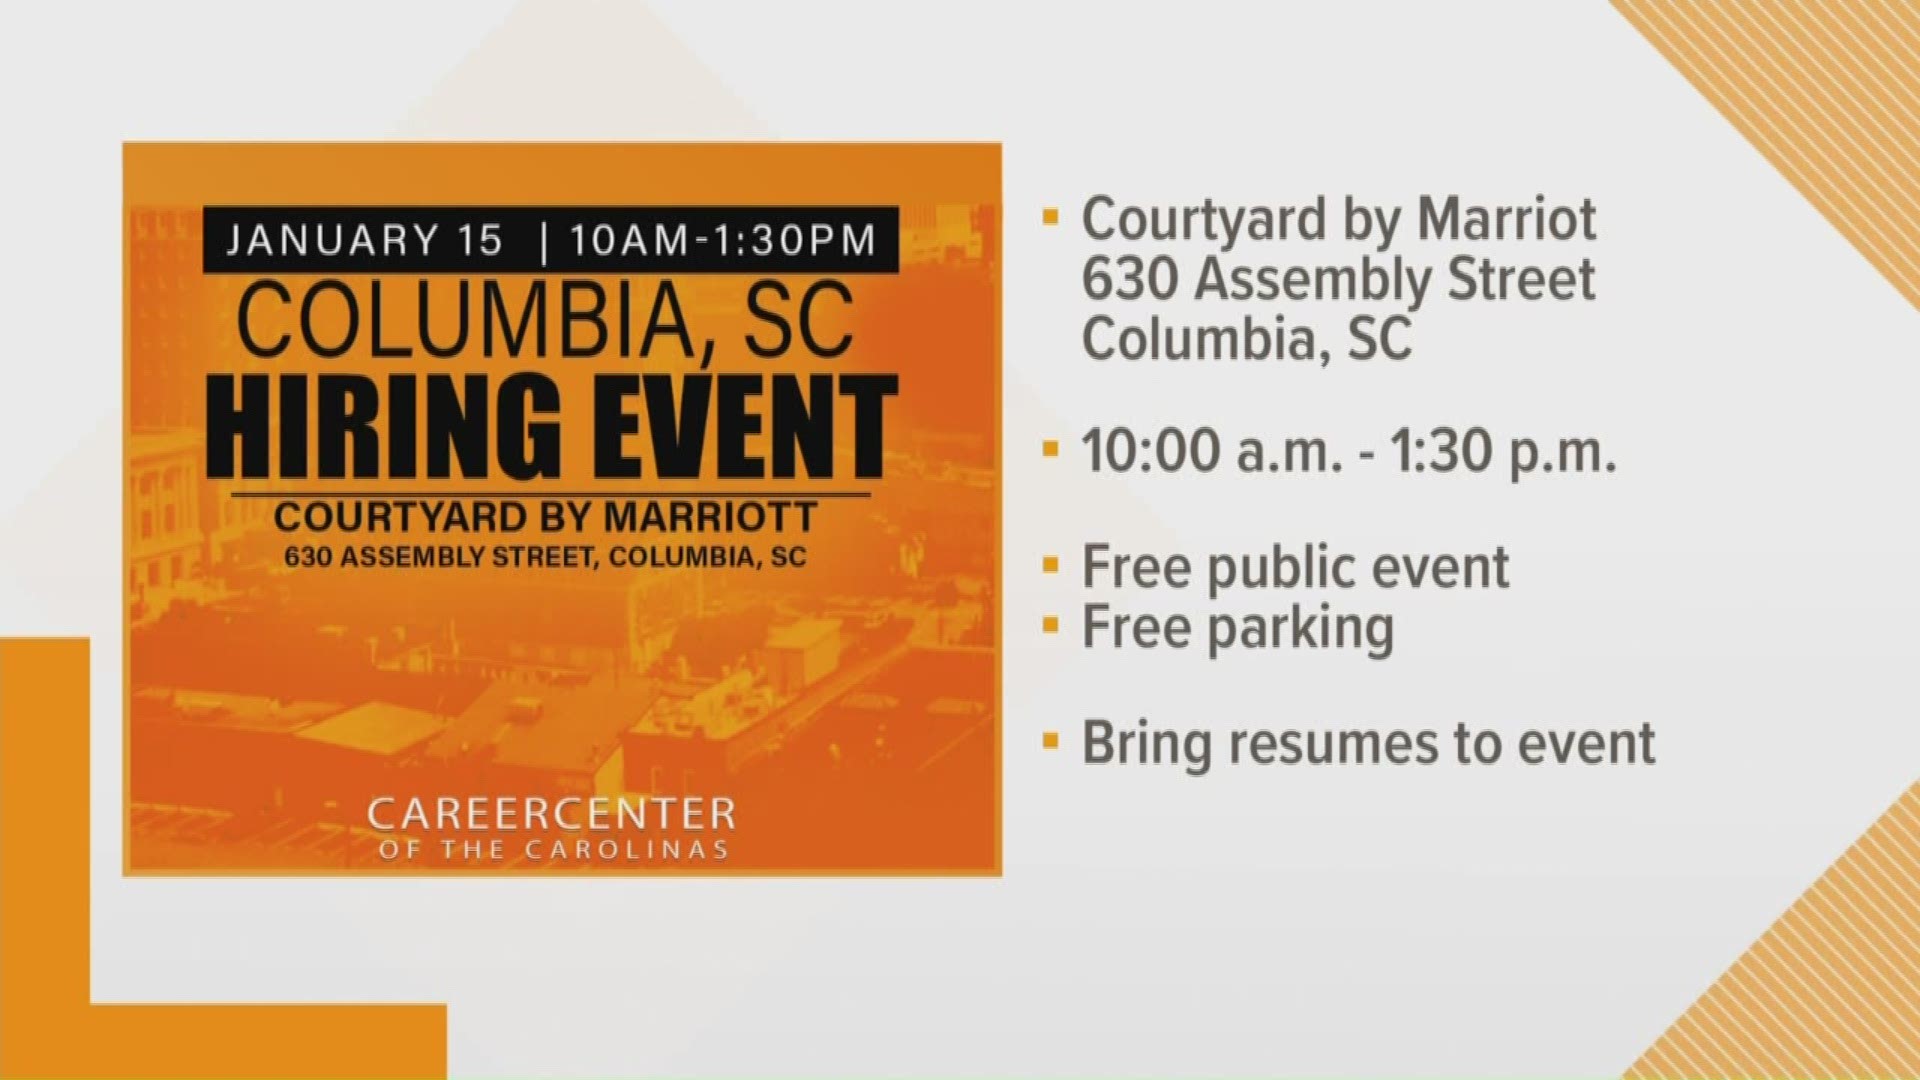 The event is 10 a.m. to 1:30 p.m. at Courtyard by Marriott Columbia Downtown at USC, on Assembly St.